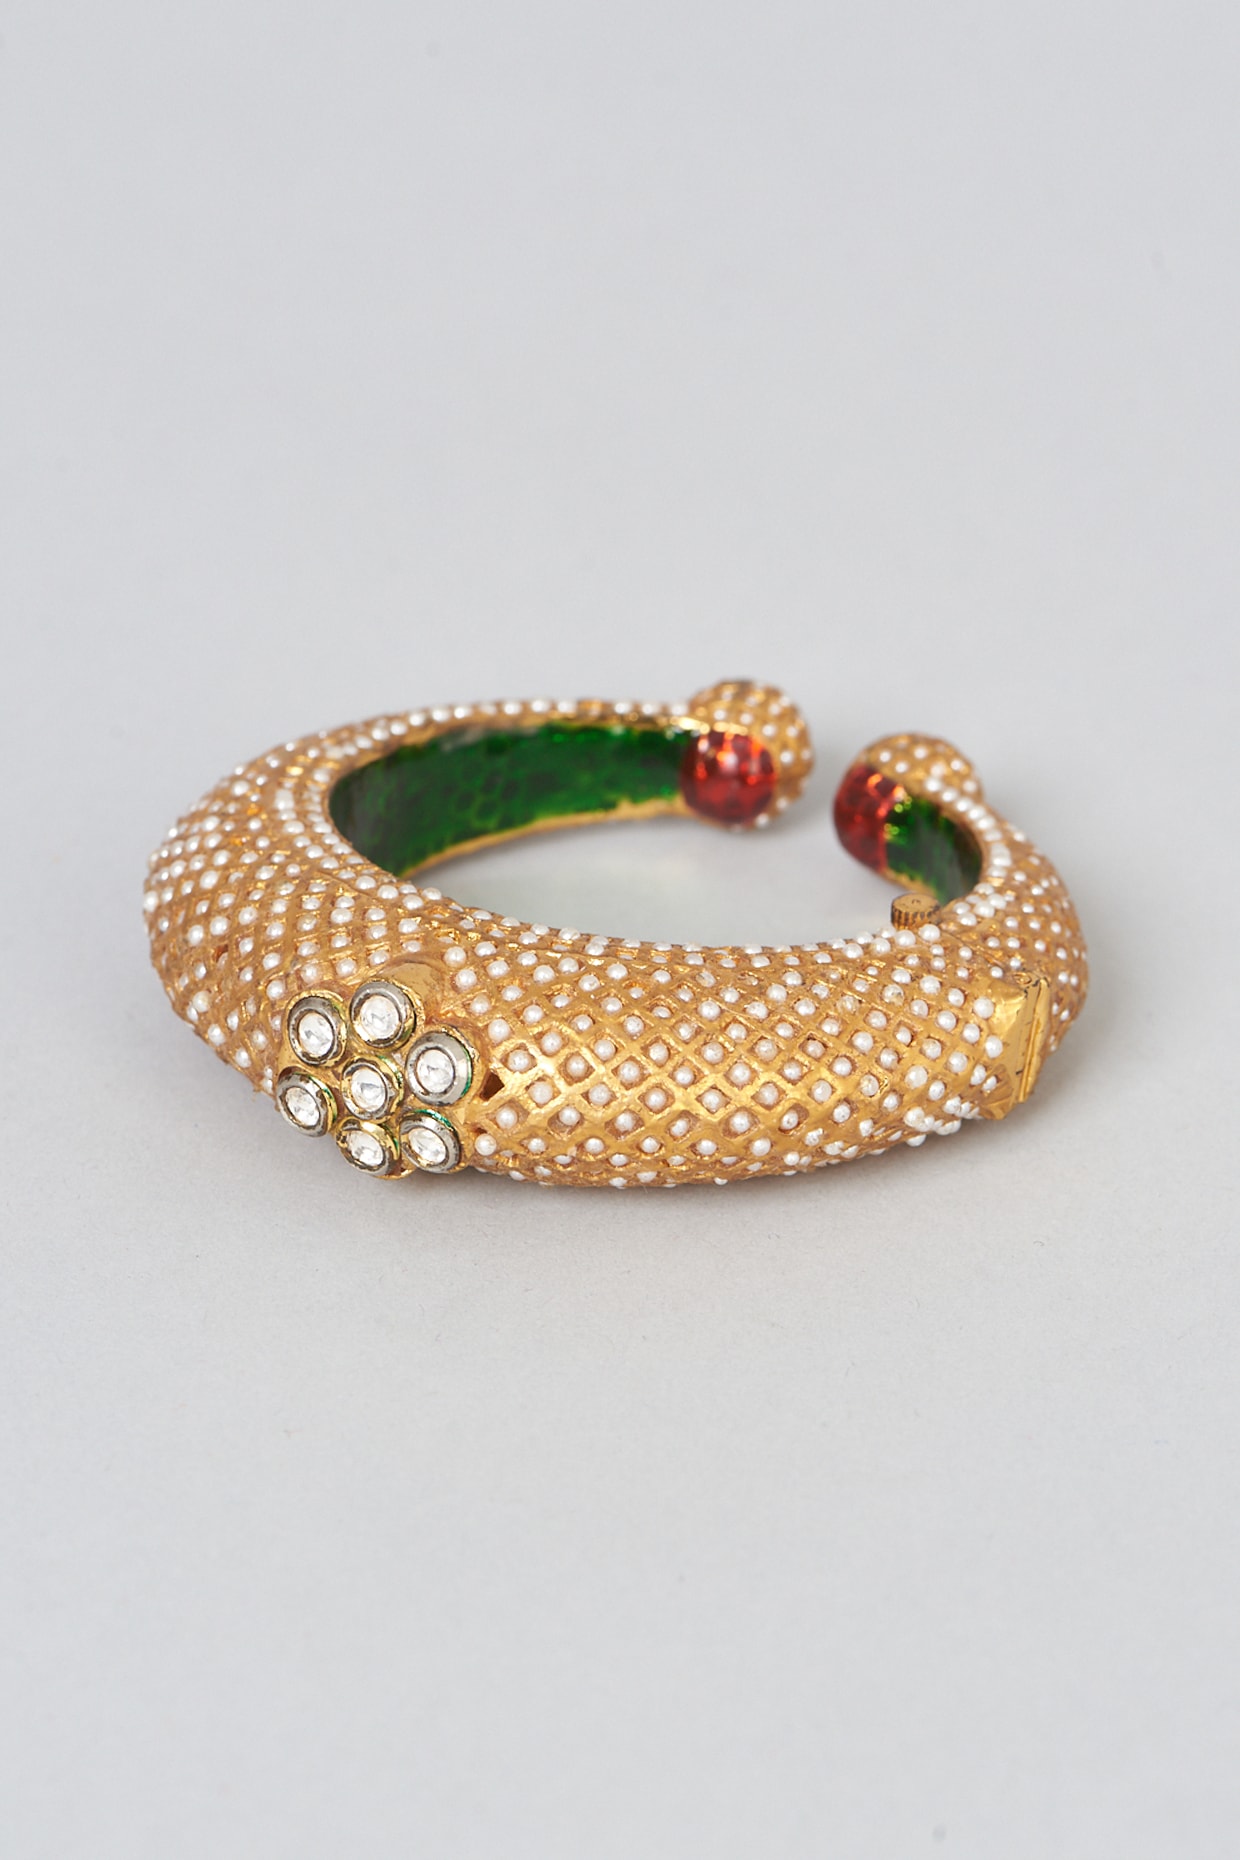 Buy NK Jewels Accessories Rajasthani High Quality Kundan Polki Traditional  Real Look Jadau Kada Bracelet Bangle for Women Online at Low Prices in  India | Amazon Jewellery Store - Amazon.in